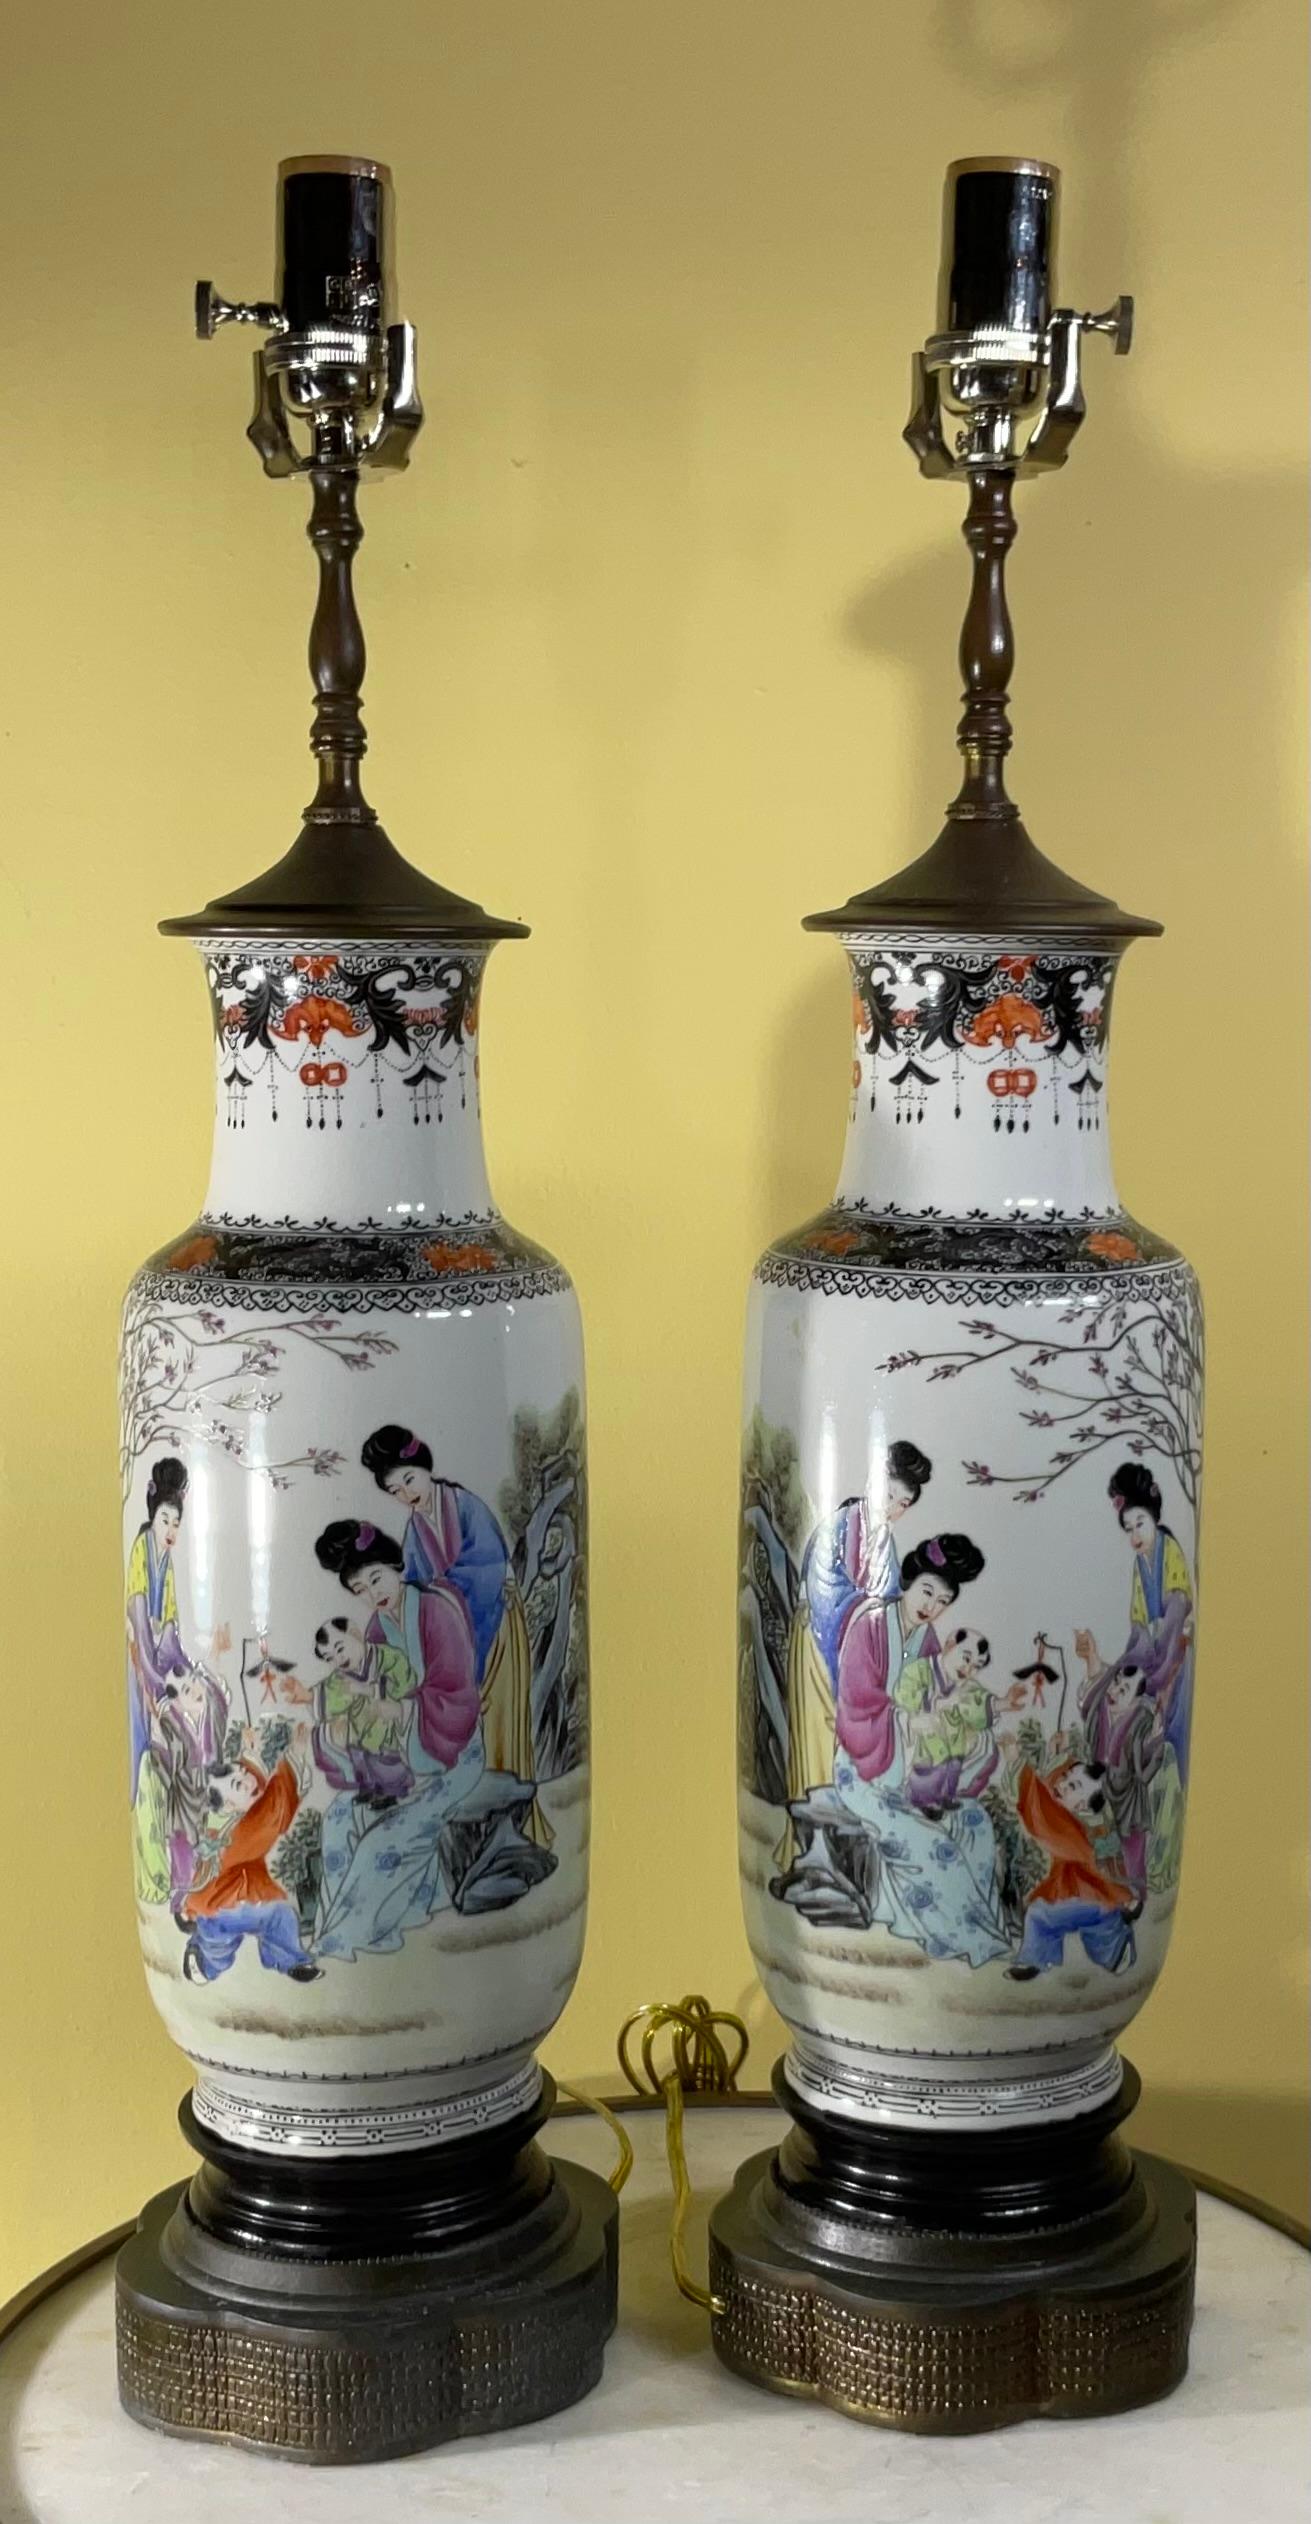 Exceptional  pair of Chinese table lamp hand painted on porcelain, beautiful colors of form of ceremony with families and there  children in the garden , in The back is Chinese script which I have not deciphered. The neck has scrolling border of